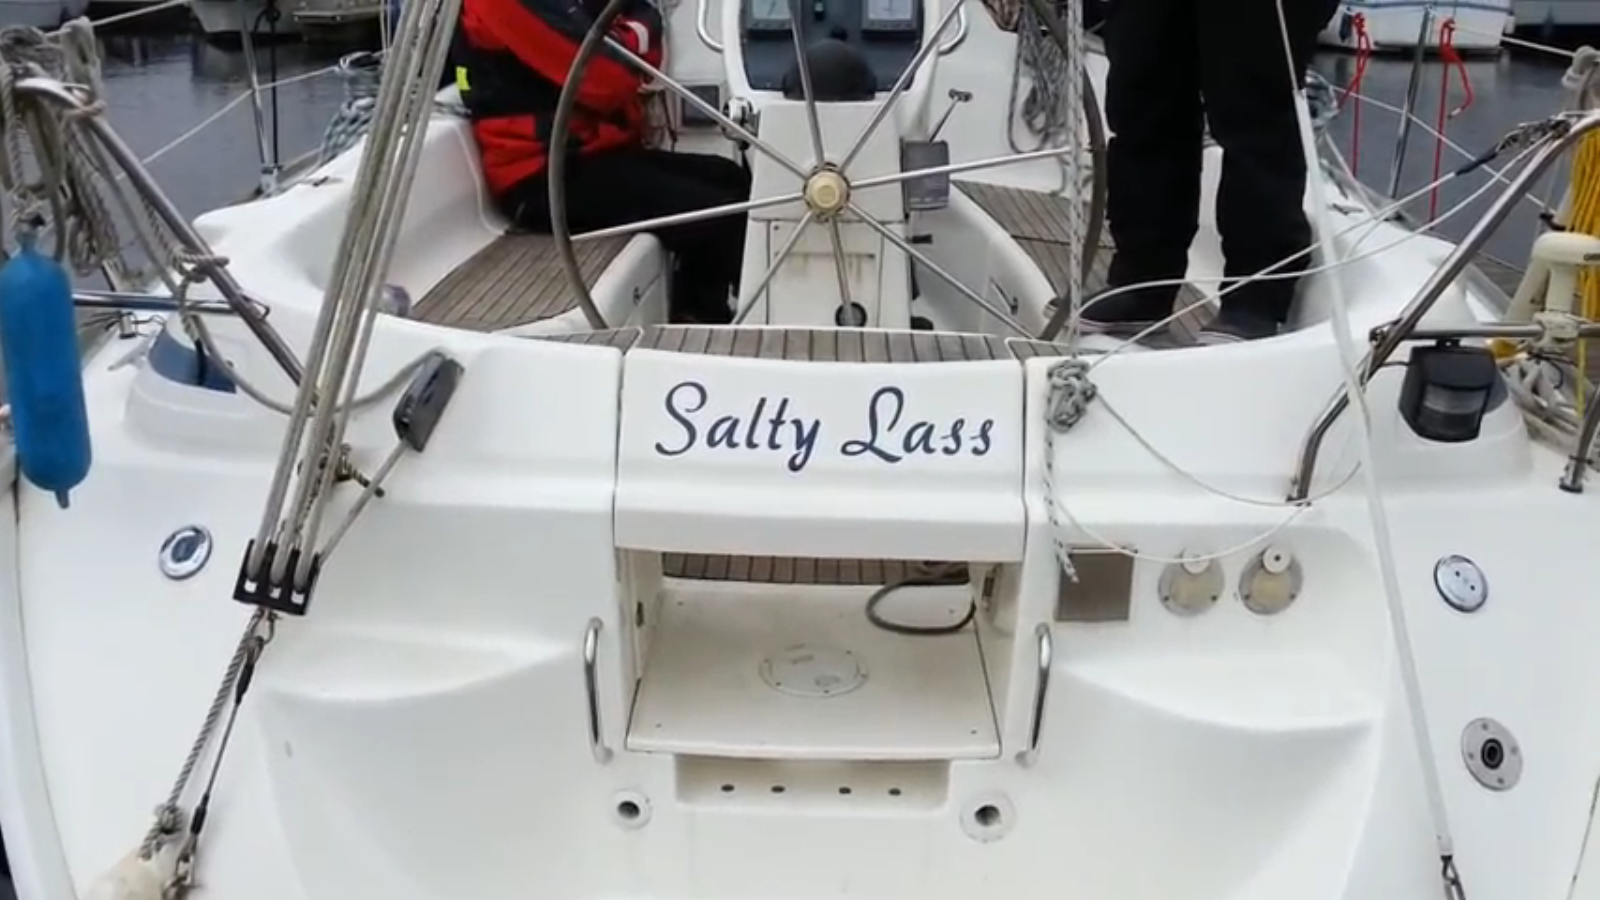 Watch us add Salty Lass to our yacht at last in full screen and add comments etc. 